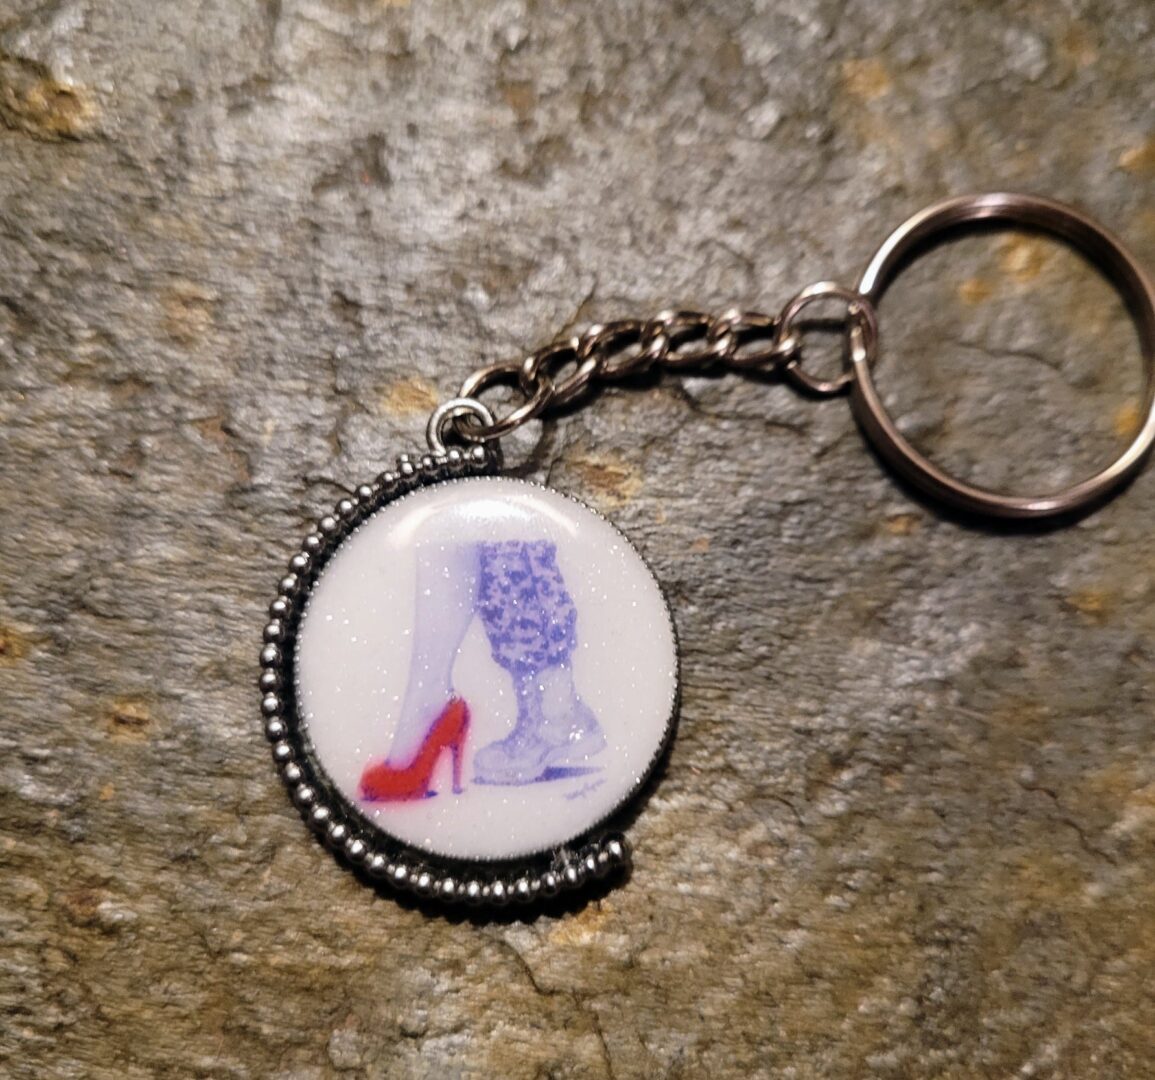 Kelly McCook Epoxy Inlay Keychain with an image of a red high heel and blue patterned boot against a white background, attached to a metal ring, on a textured surface.